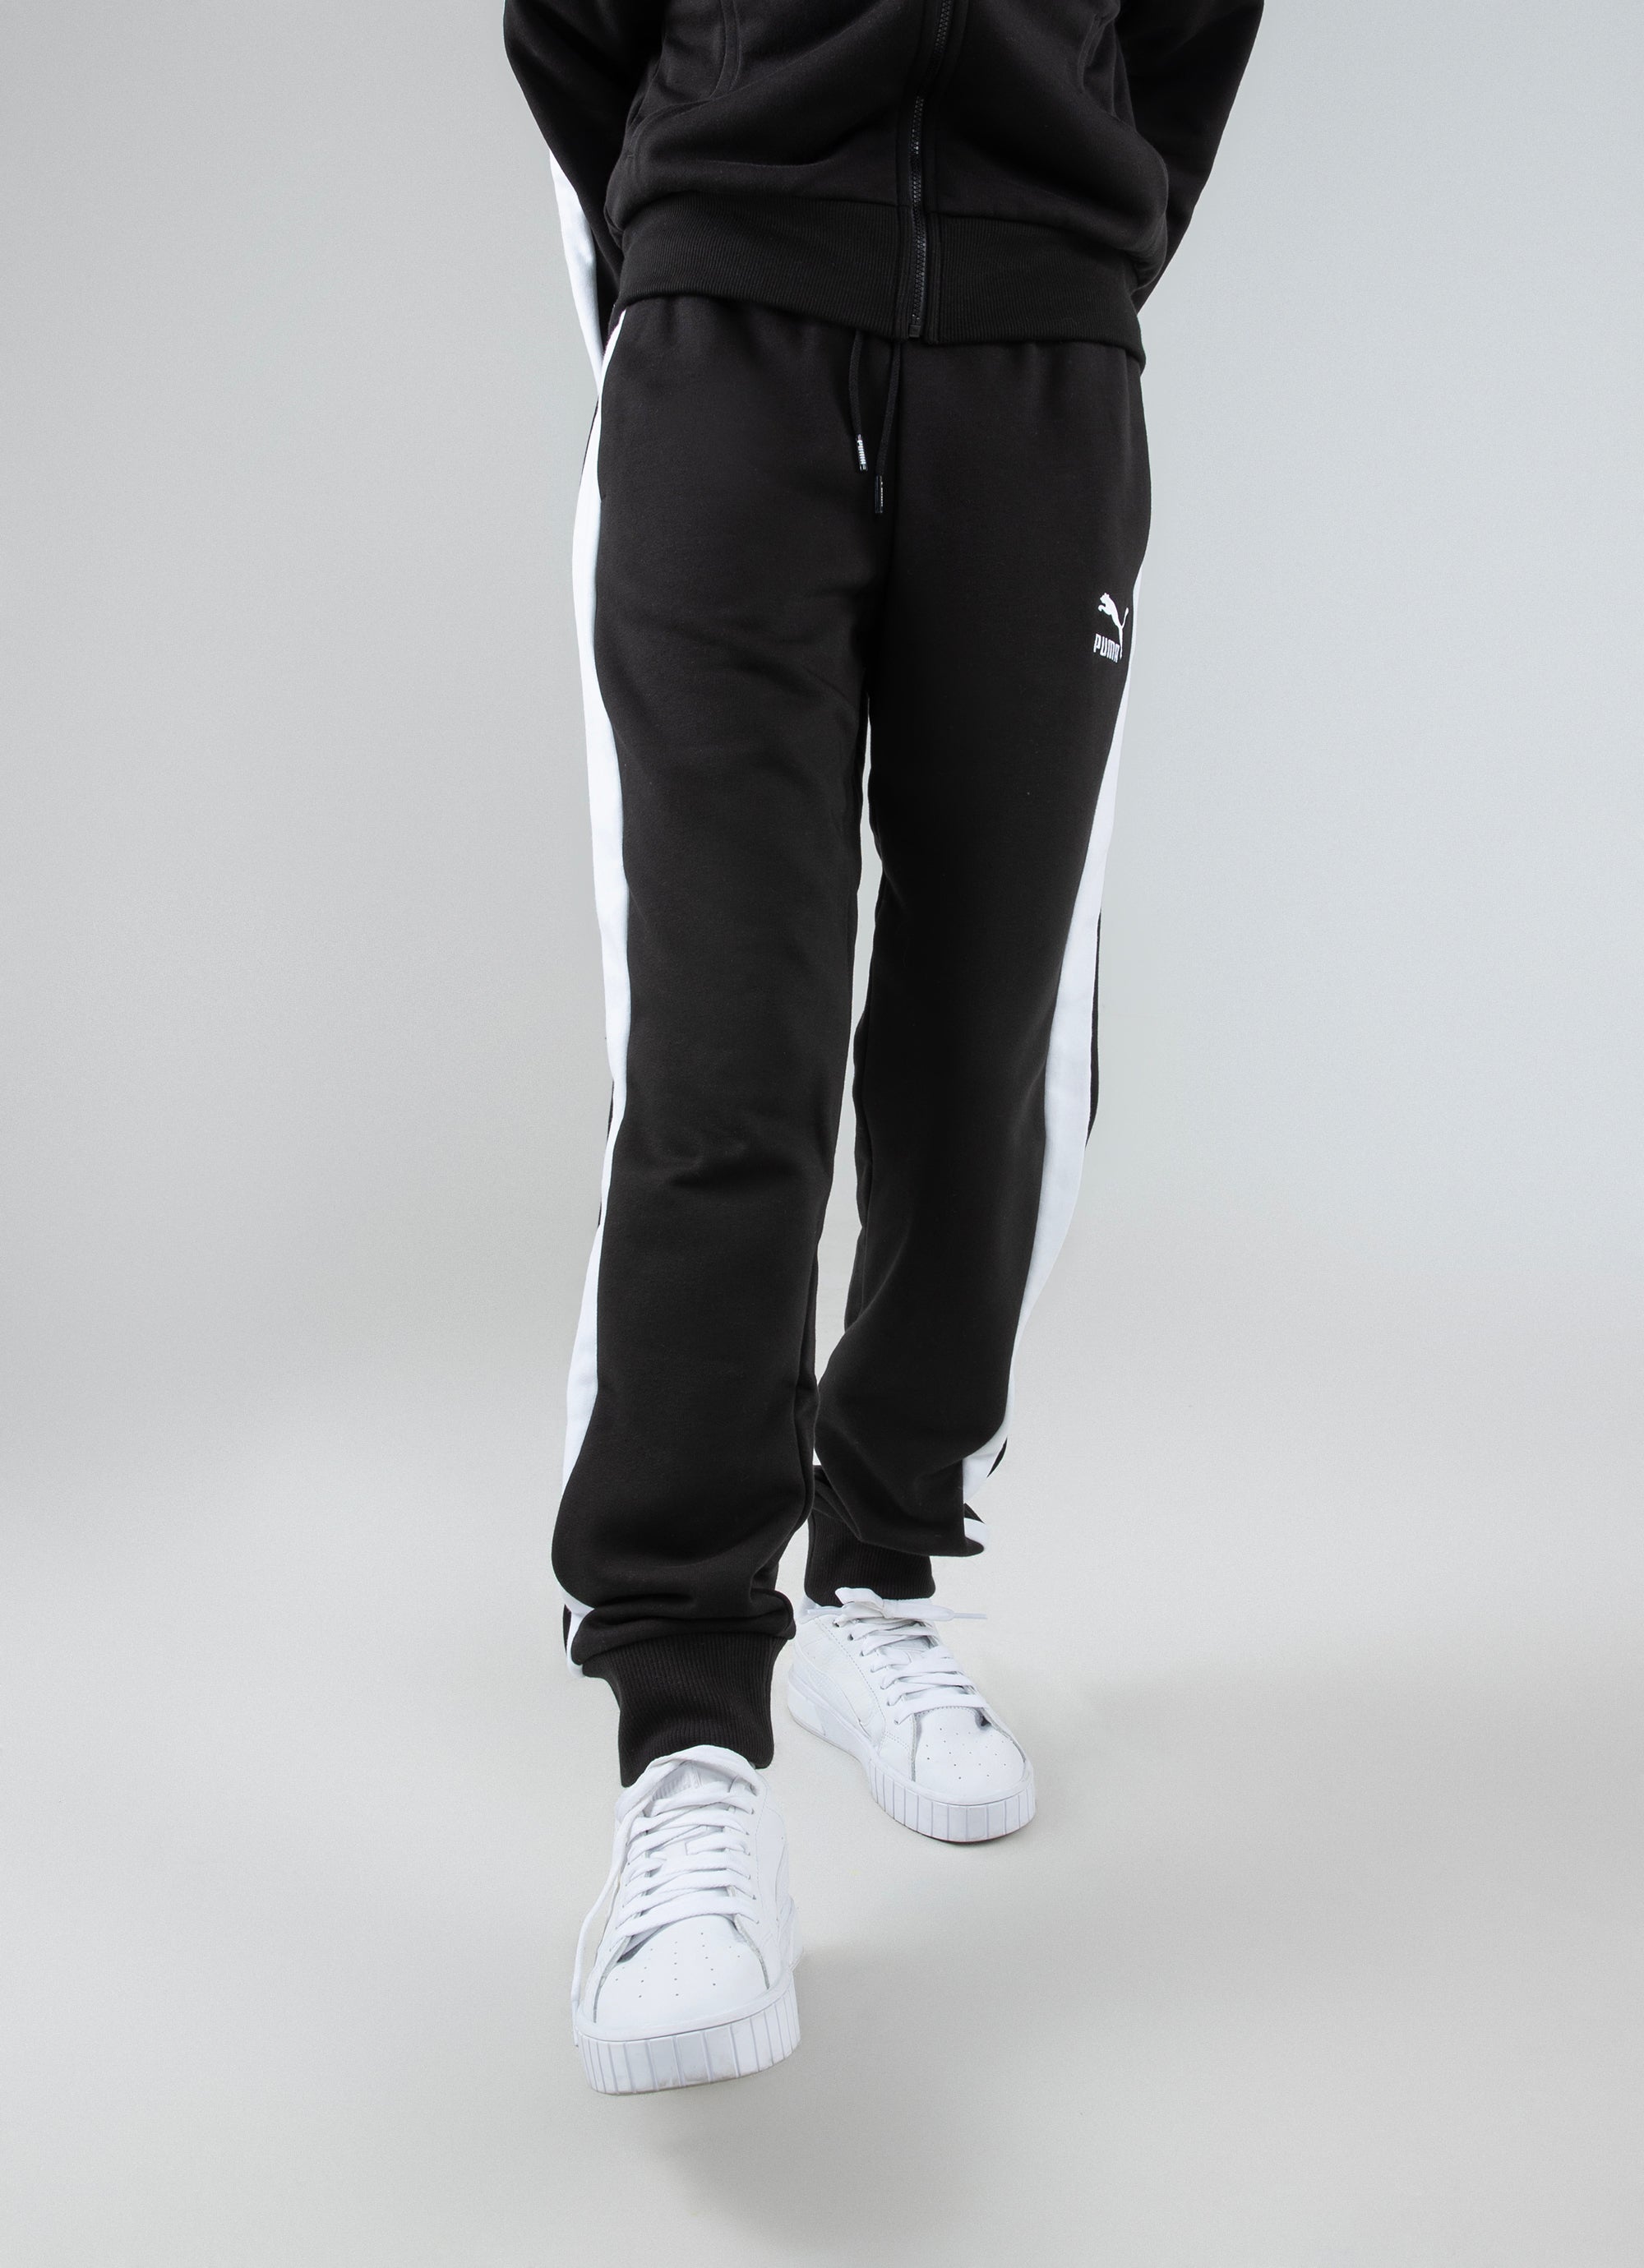 Puma T7 Track Pants - Black (The Never Worn) - 533483-01 | OUTBACK Sylt